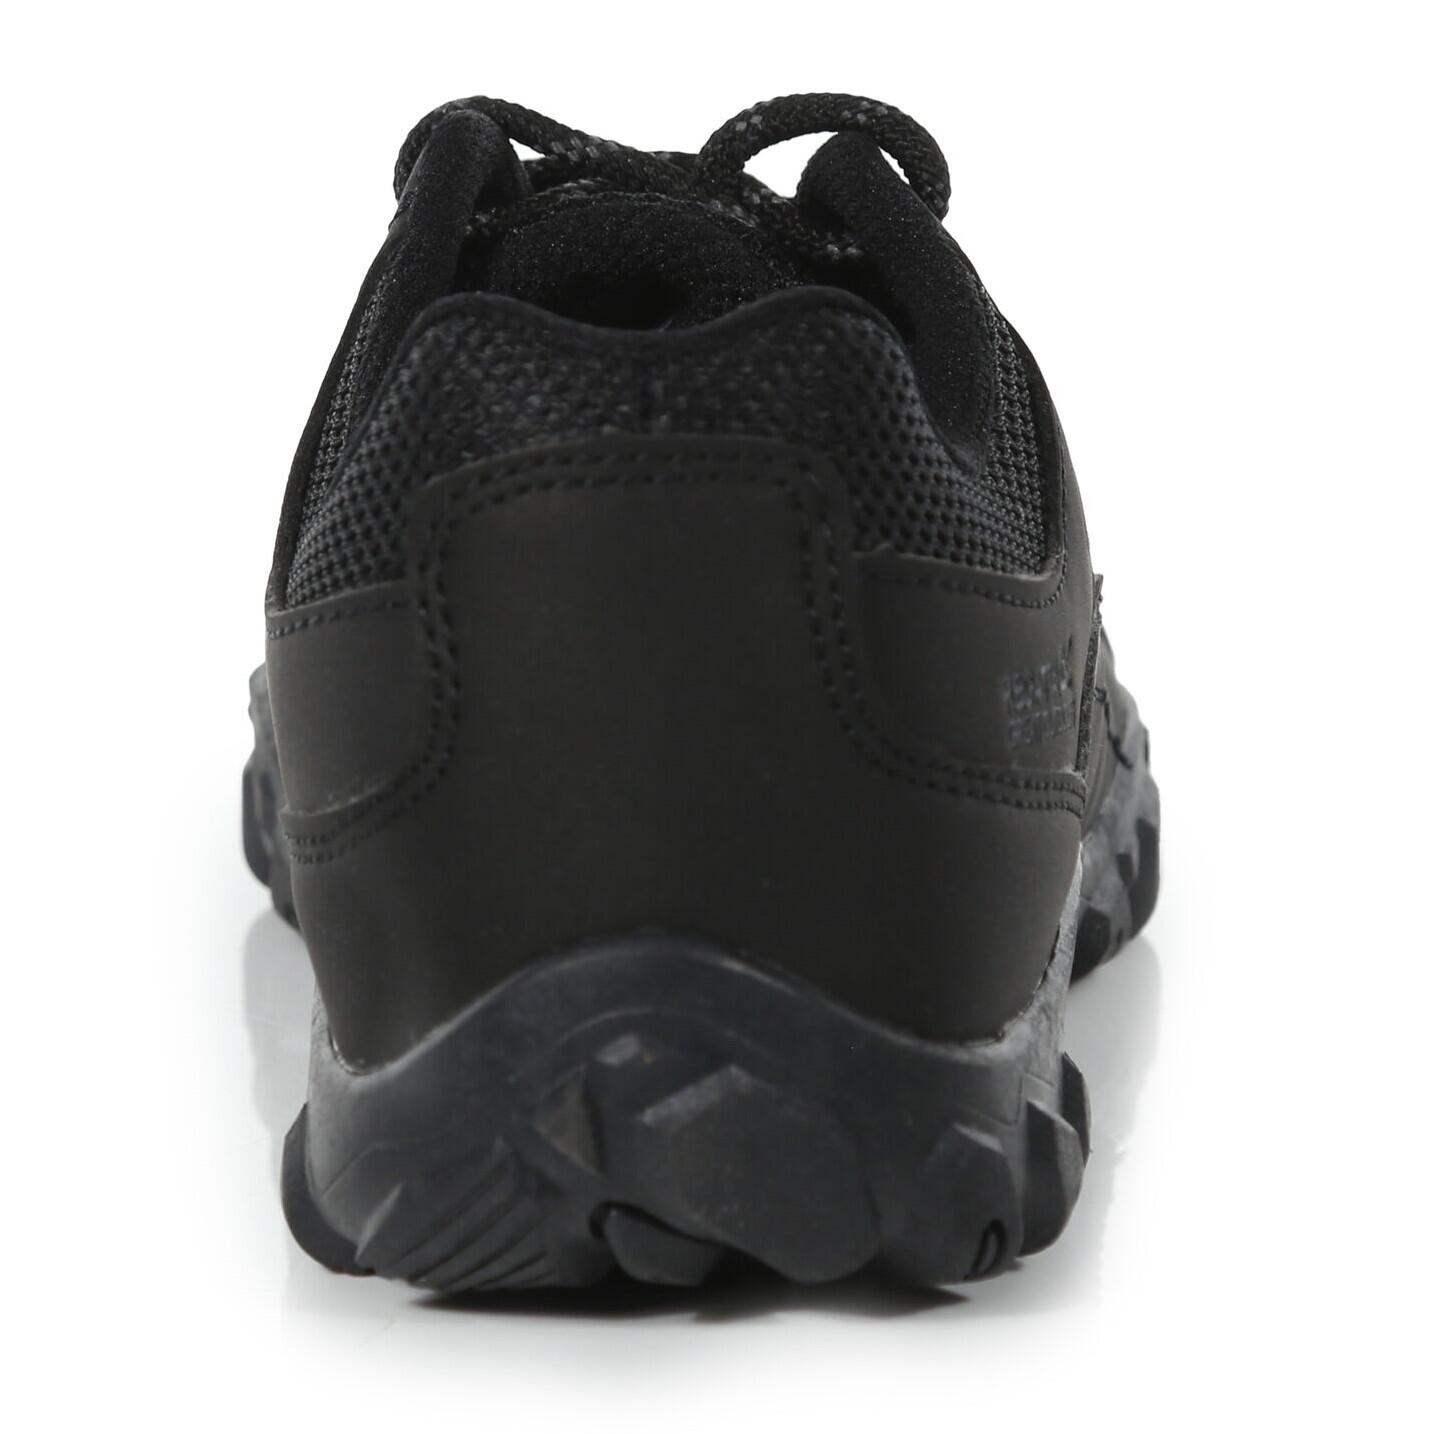 Childrens/Kids Edgepoint Walking Shoes (Black) 2/5